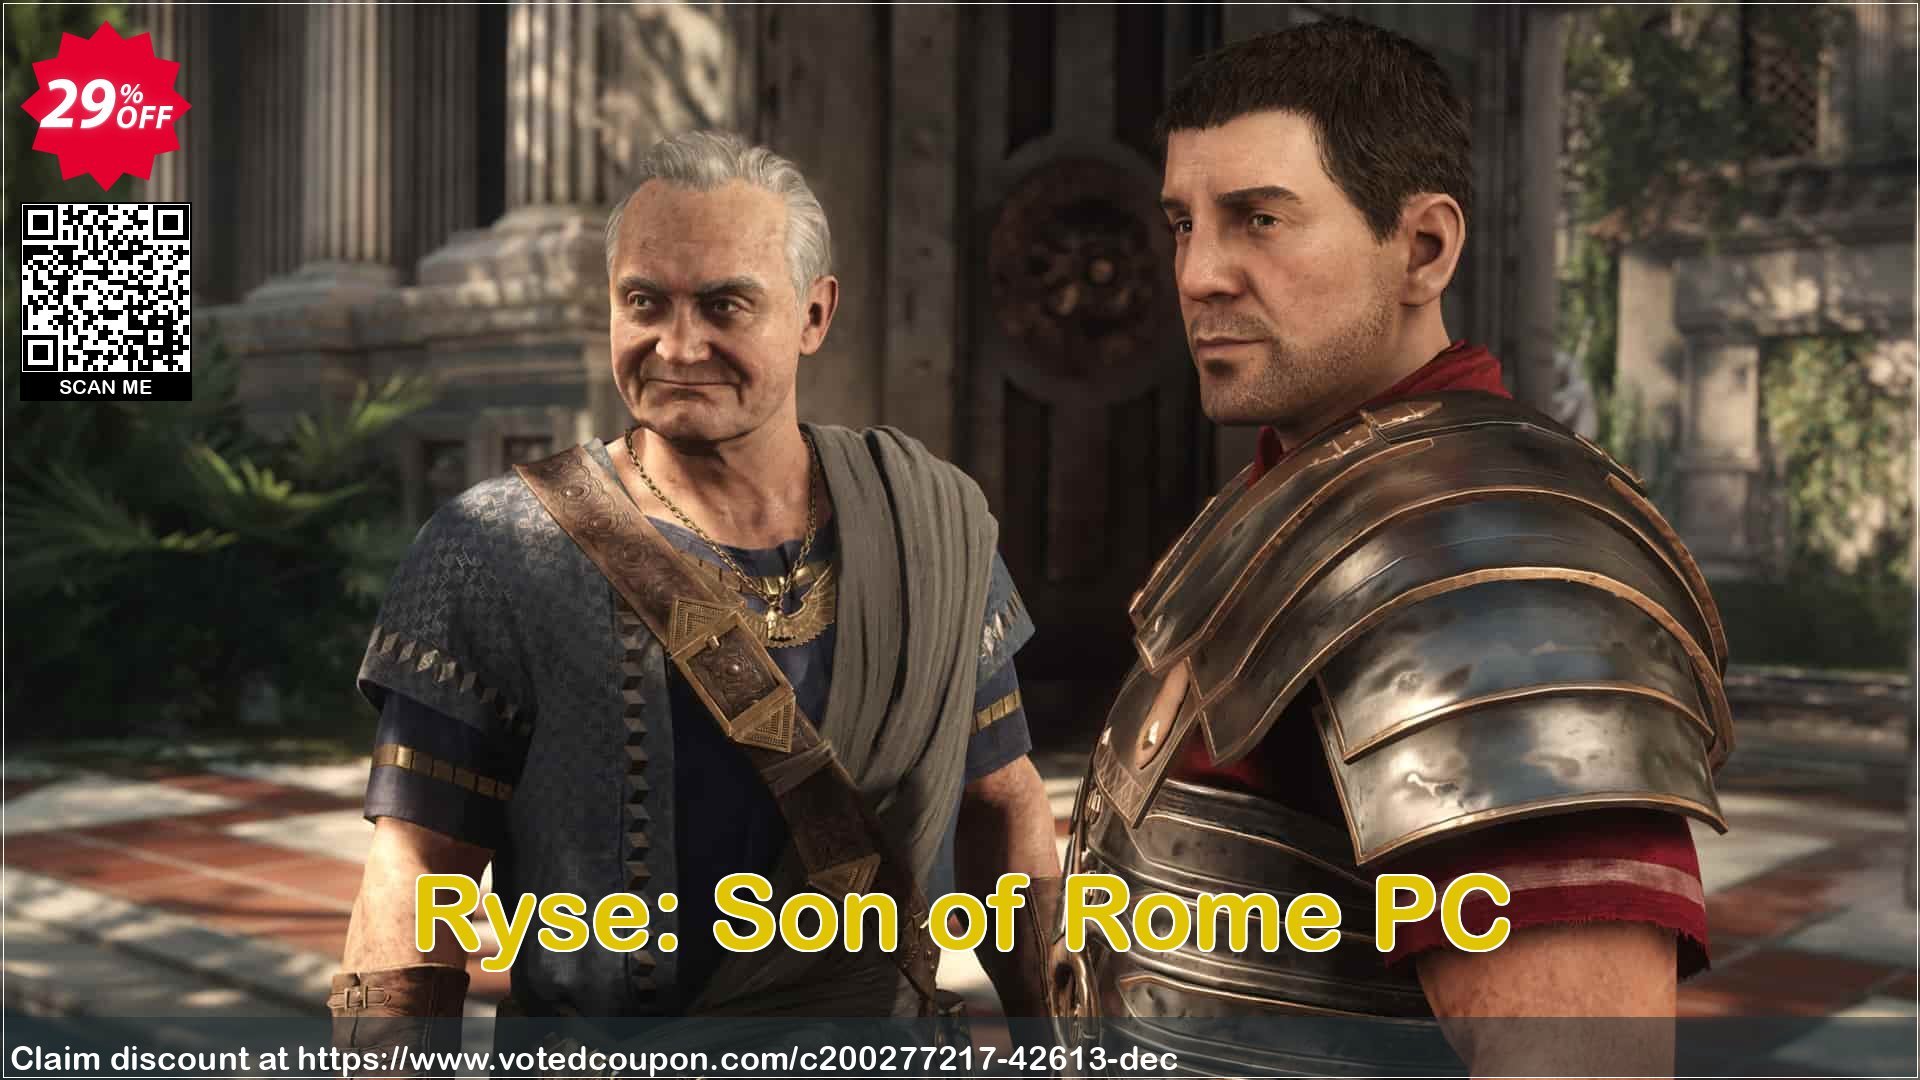 Ryse: Son of Rome PC Coupon Code May 2024, 29% OFF - VotedCoupon